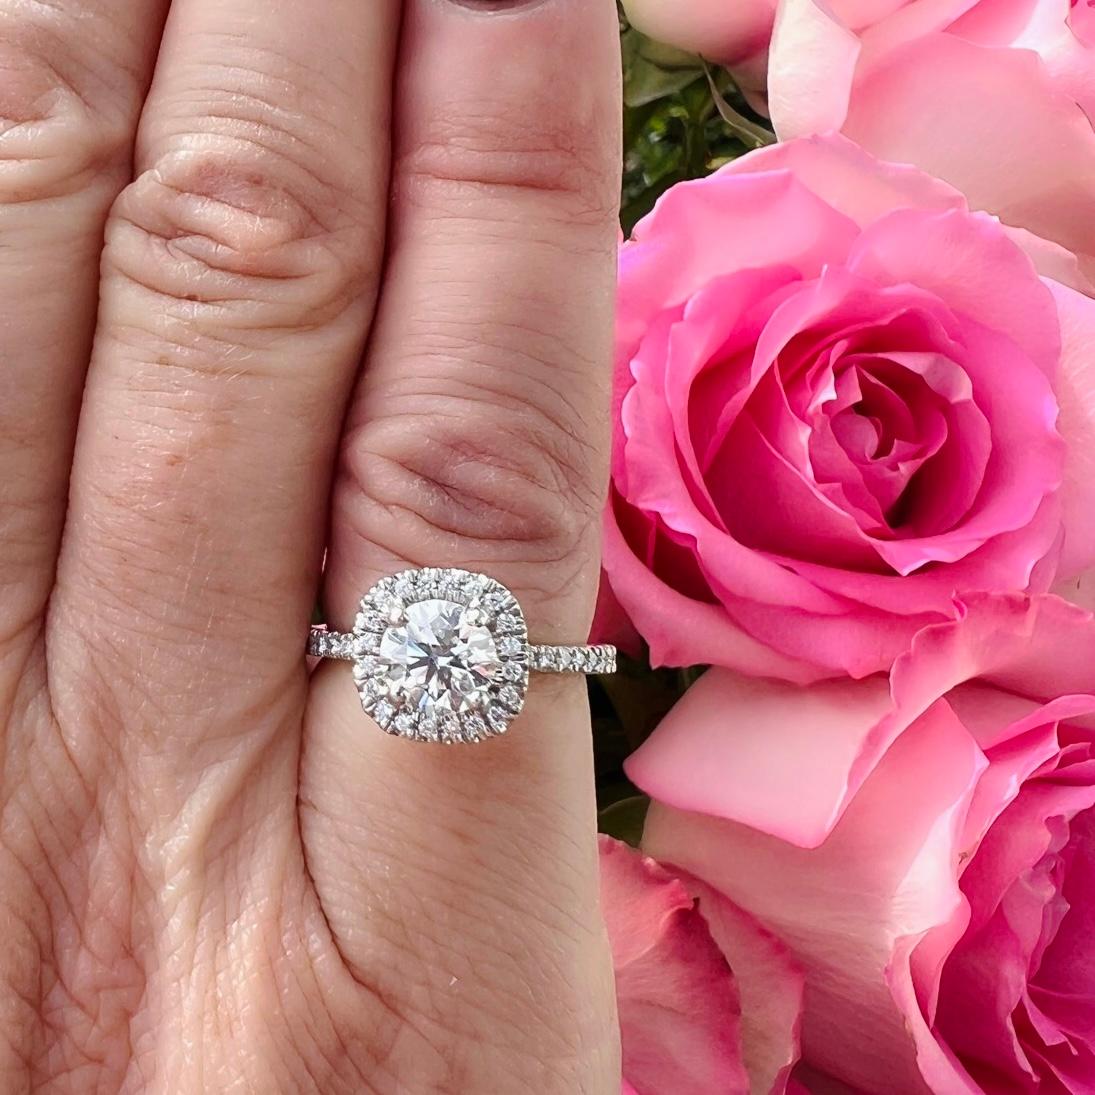 A near perfect diamond falls right into place in this gorgeously designed platinum ring. The center is a 0.96 carat GIA graded F/VS1 Round Brilliant Diamond with Excellent Cut, set with four prongs in a halo of wonderfully matched smaller white